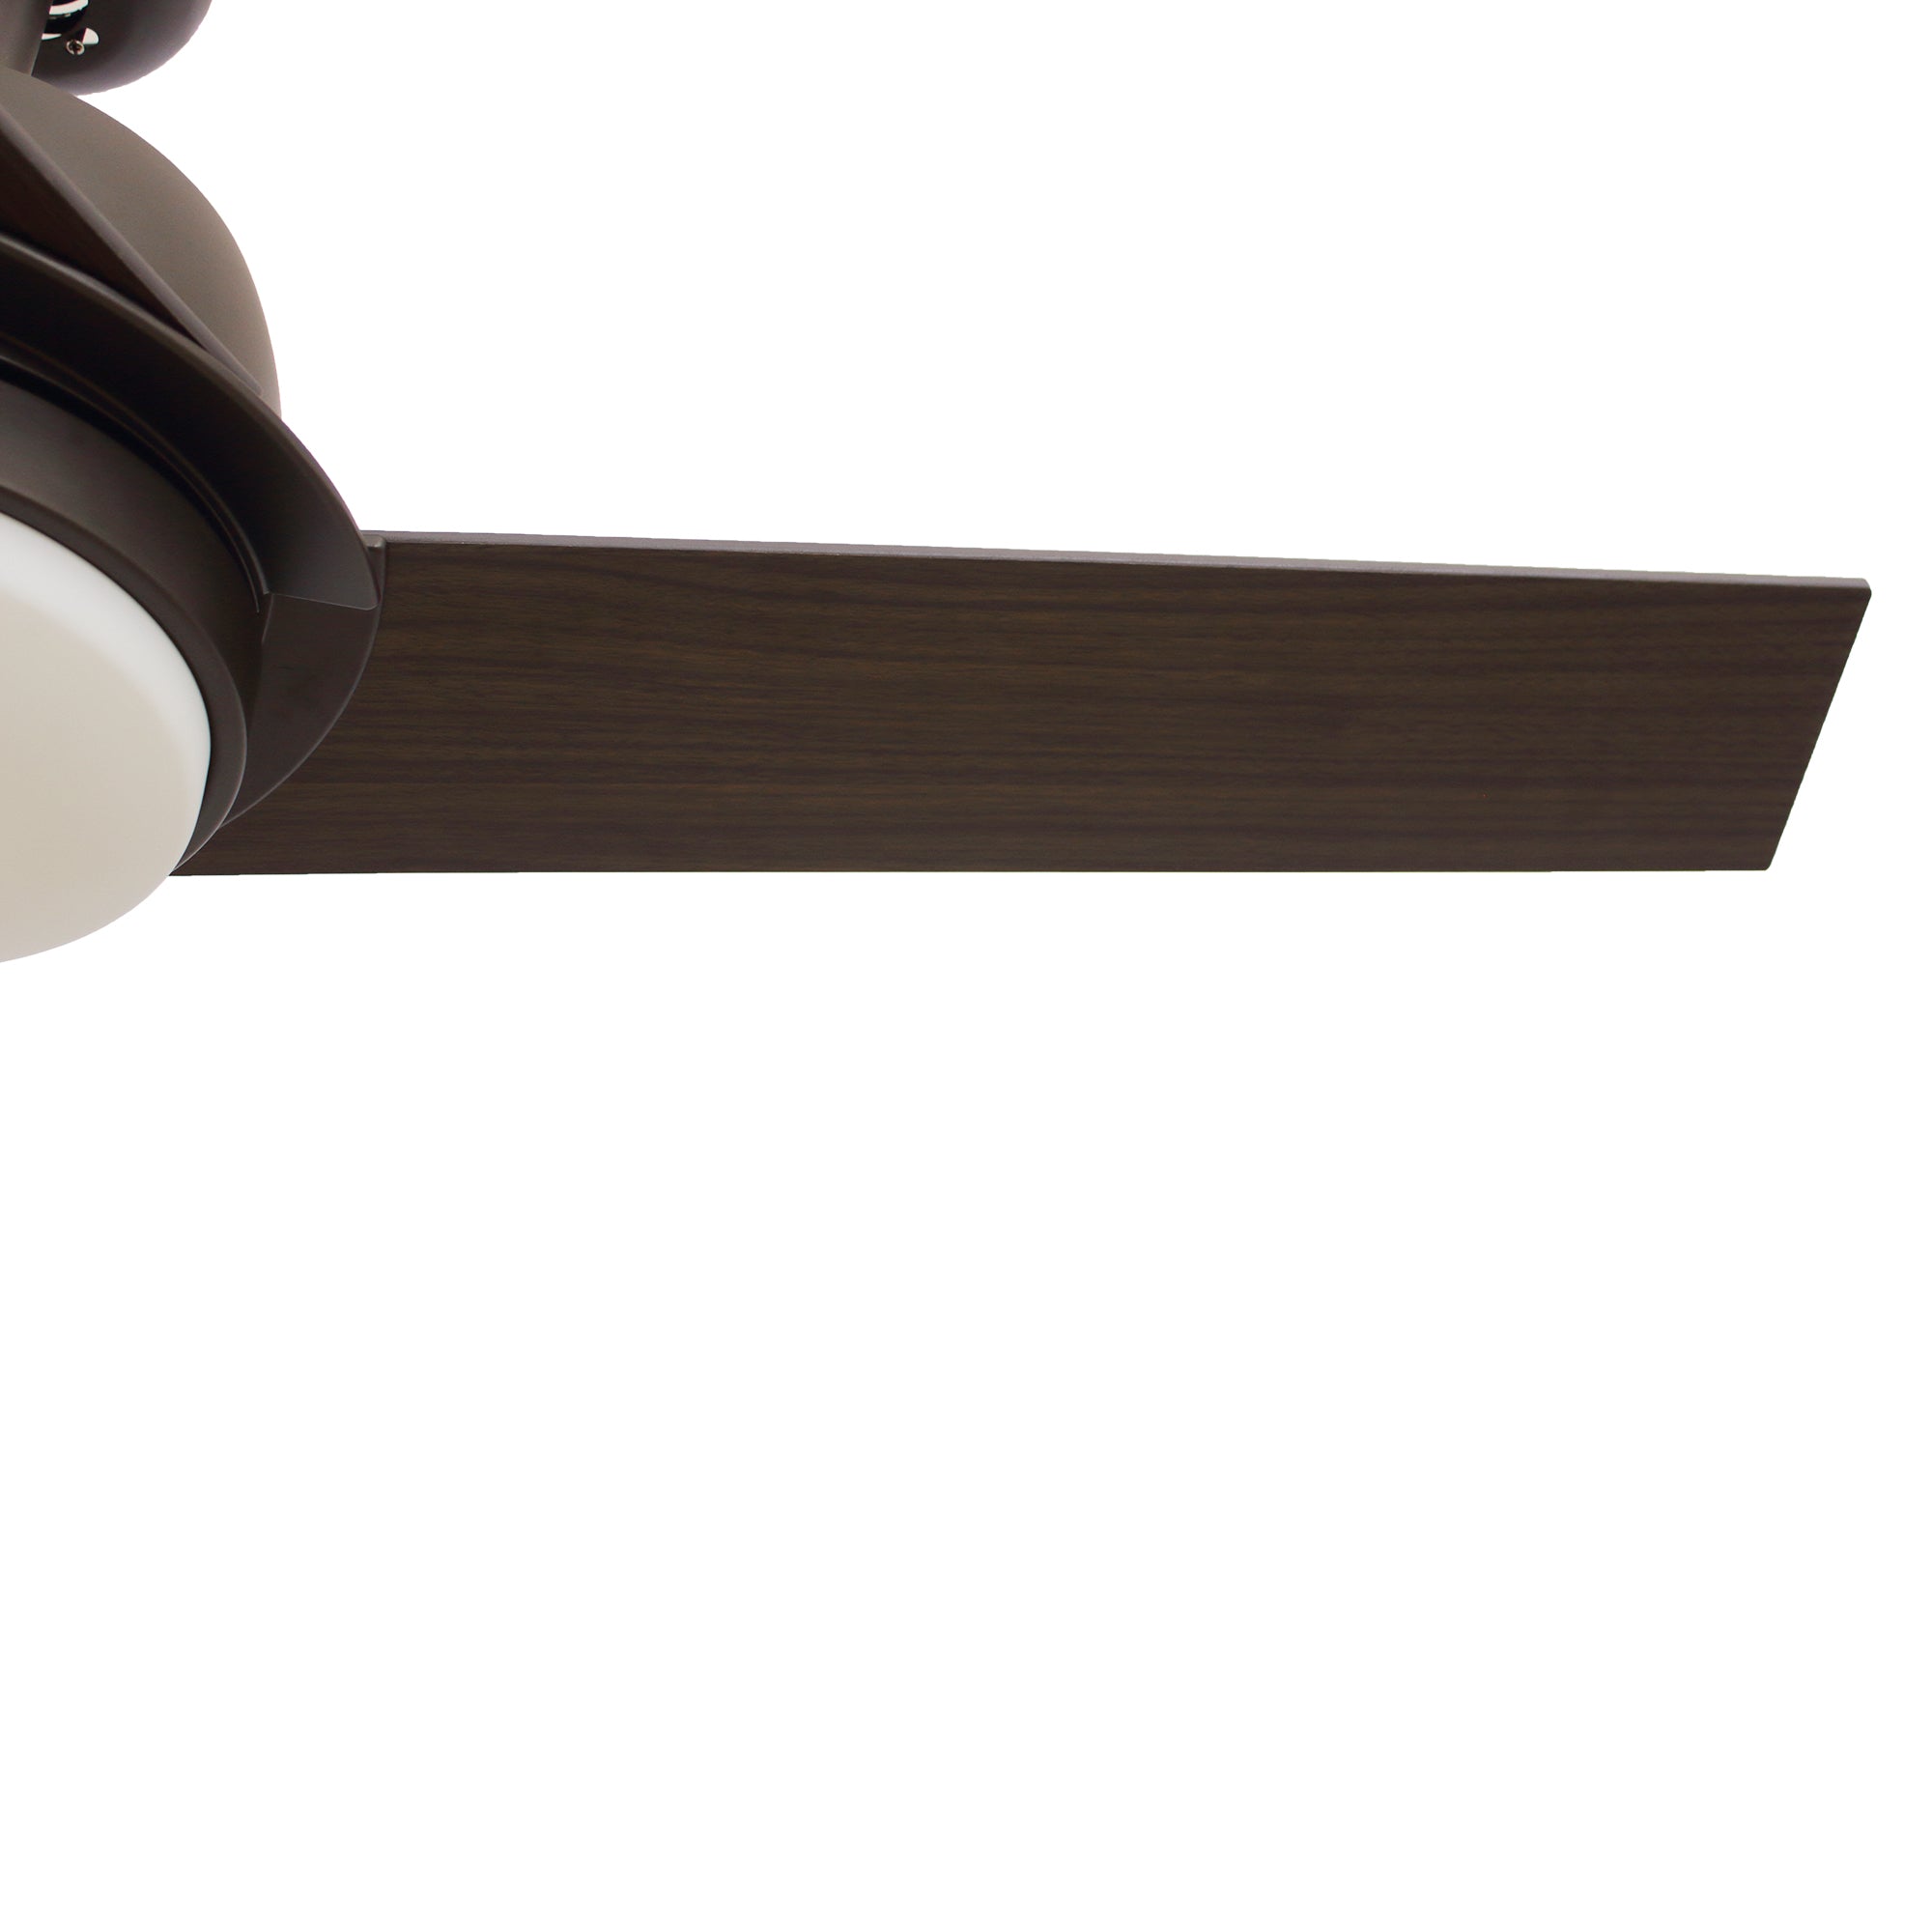 This Smafan Addison 52&#39;&#39; Smart Ceiling Fan keeps your space cool, bright, and stylish. It is a soft modern masterpiece perfect for your large indoor living spaces. This Wifi smart ceiling fan is a simplicity designing with White finish, use elegant Plywood blades and compatible with LED Light. The fan features wall control, Wi-Fi apps, Siri Shortcut and Voice control technology (compatible with Amazon Alexa and Google Home Assistant ) to set fan preferences. 